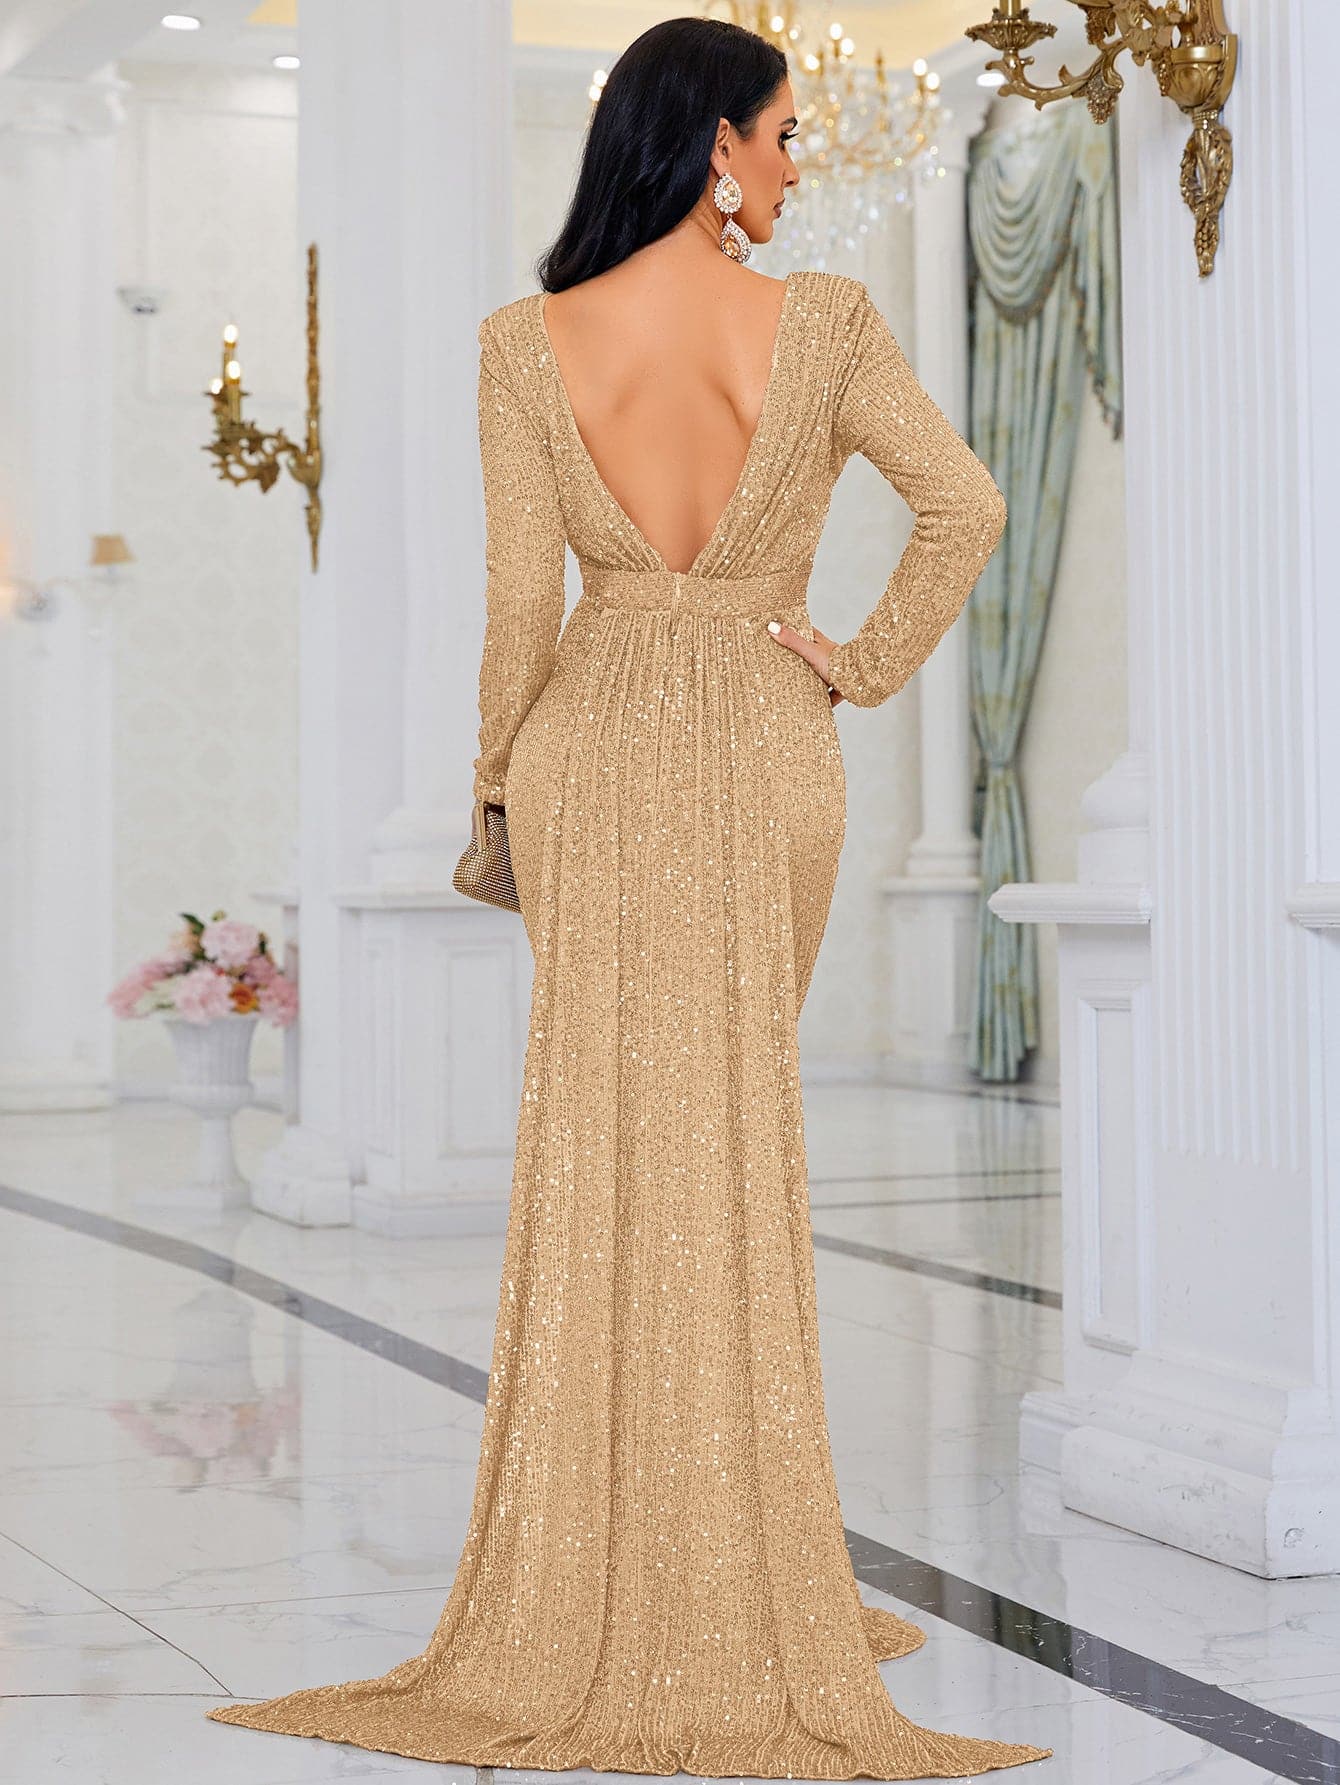 Backless Sequin Mermaid Long Sleeve Golden Prom Dress M02022 MISS ORD